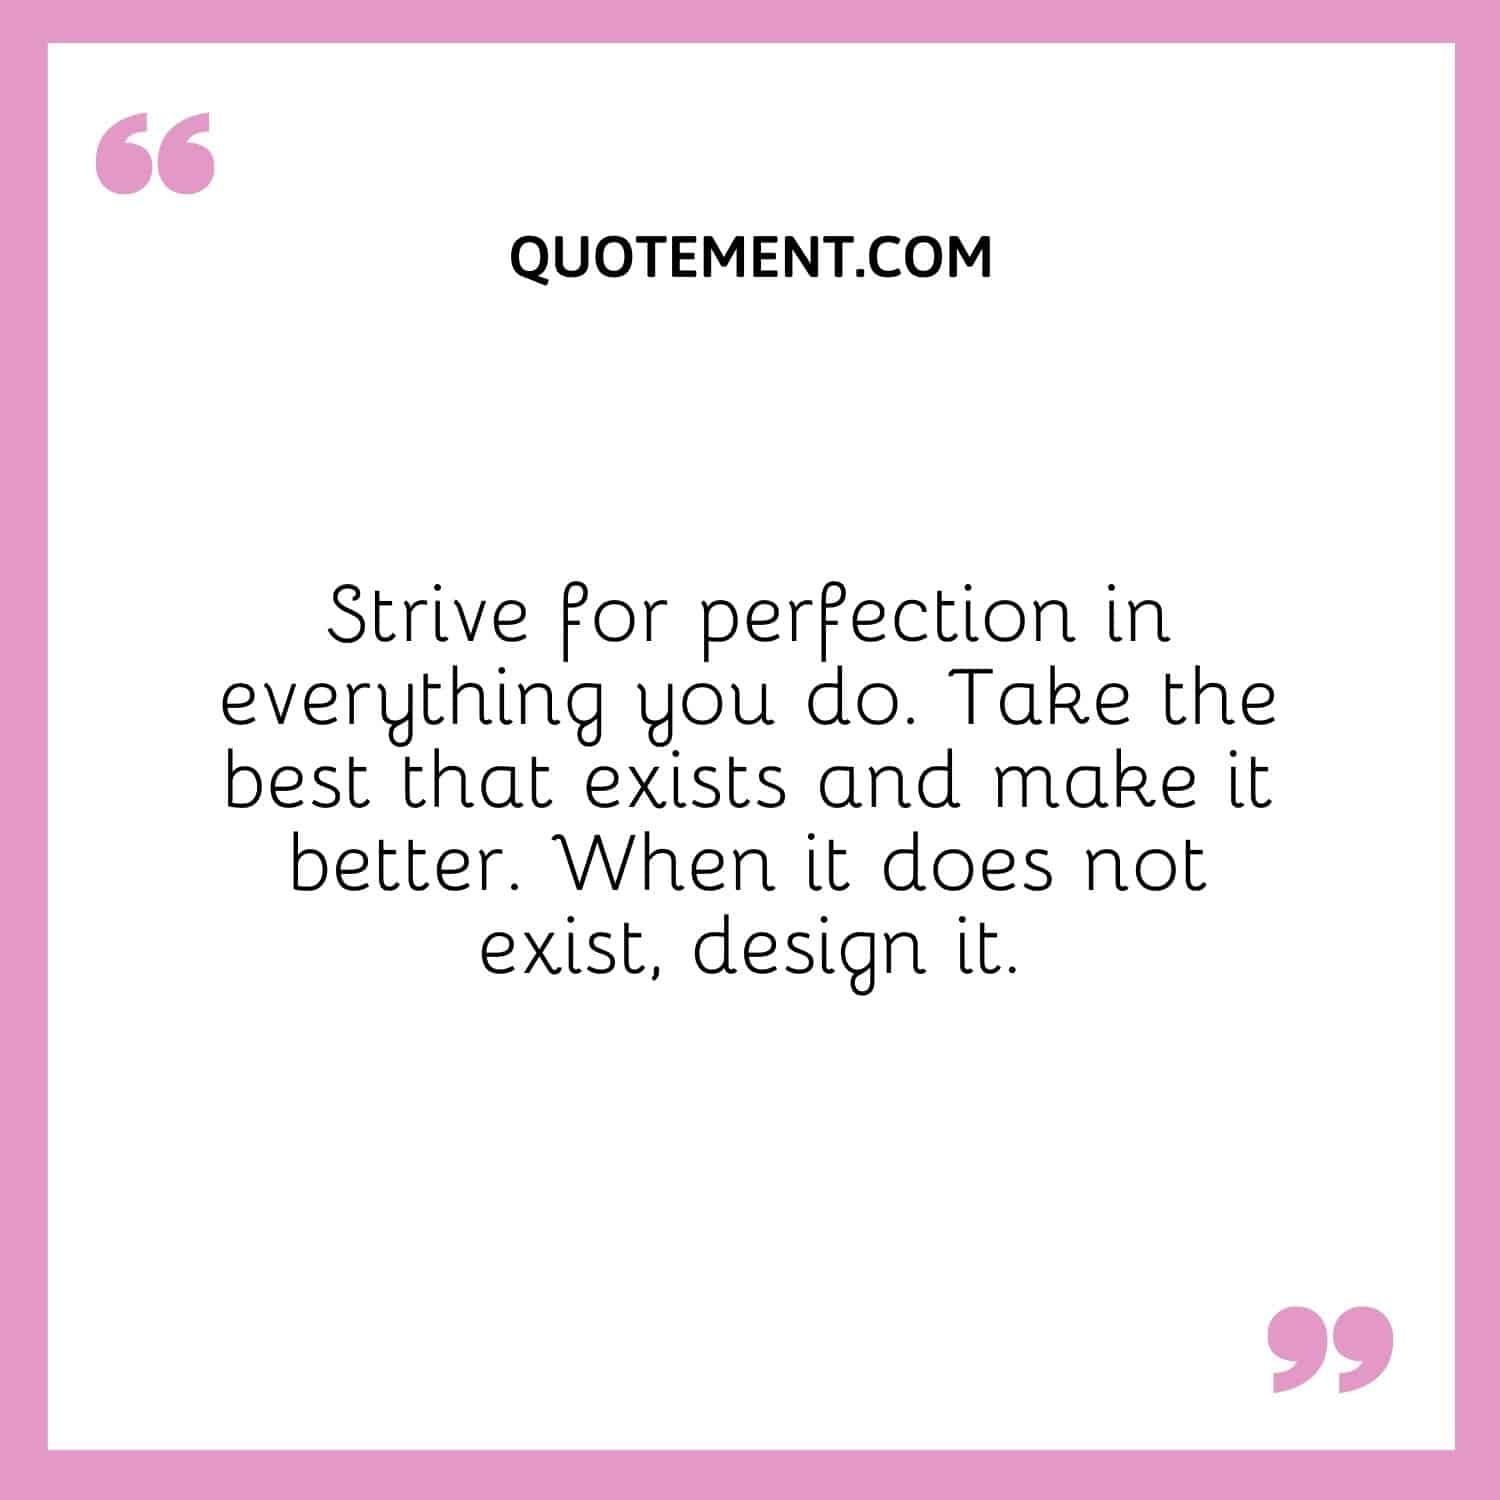 Strive for perfection in everything you do. Take the best that exists and make it better. When it does not exist, design it.